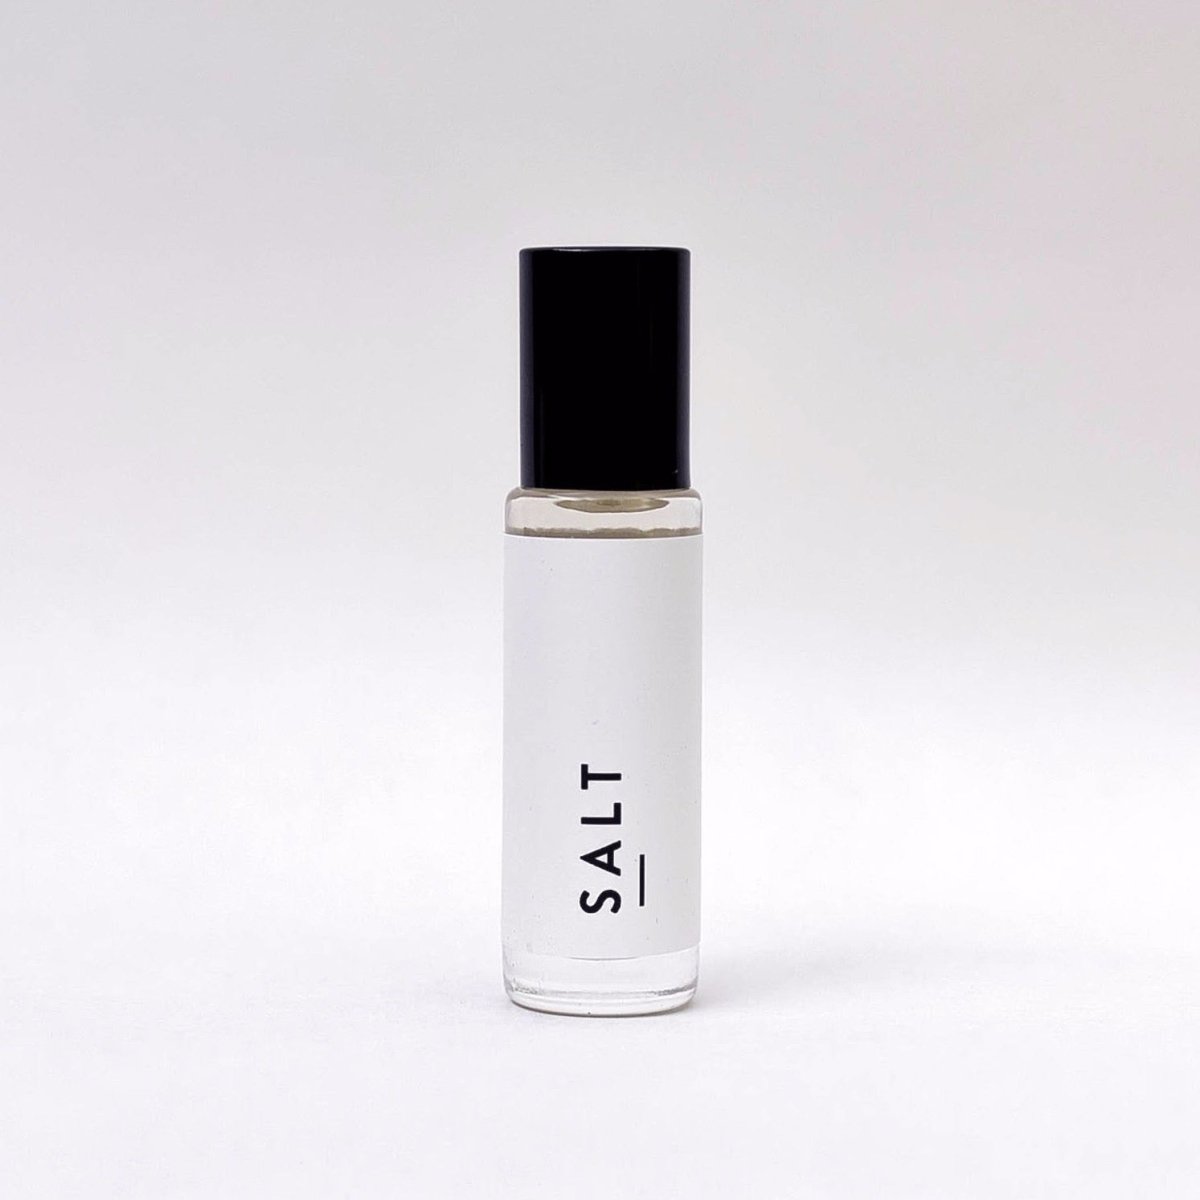 15ml cylindrical perfume roller in the scent Salt. Made by Particle Goods in Seattle, WA.